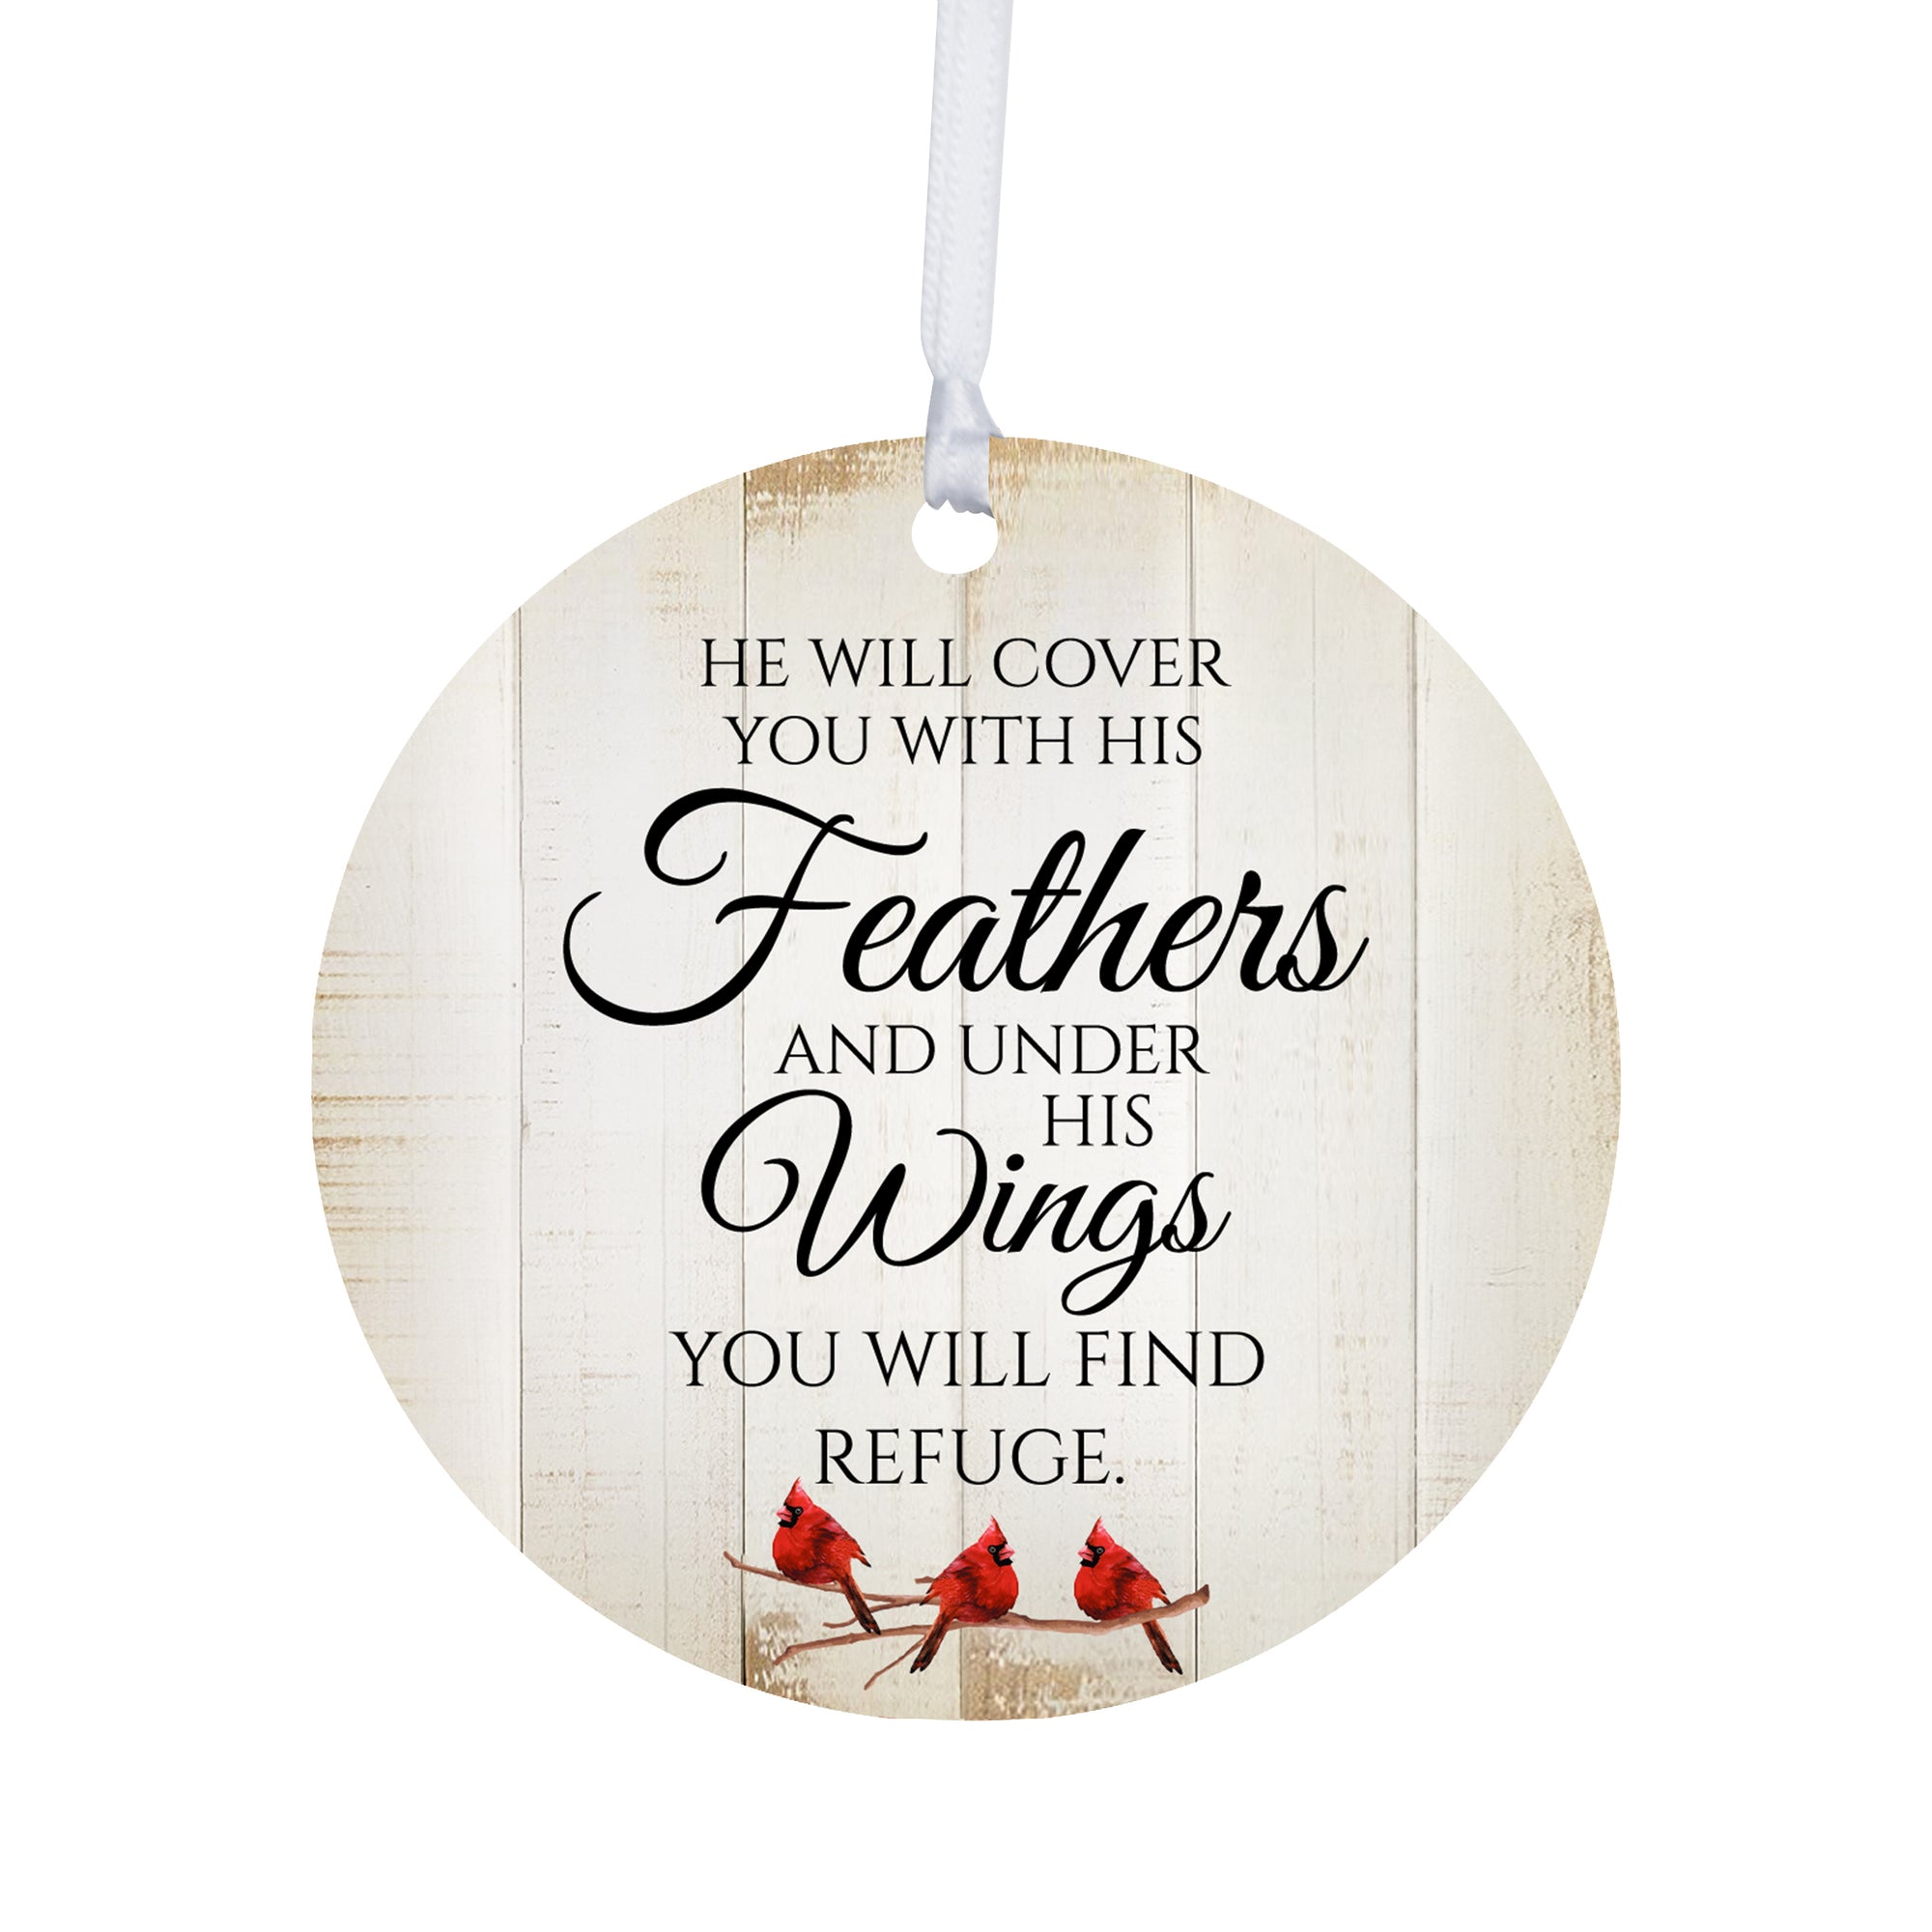 Vintage-Inspired Cardinal Ornament With Everyday Verses Gift Ideas - He Will Cover